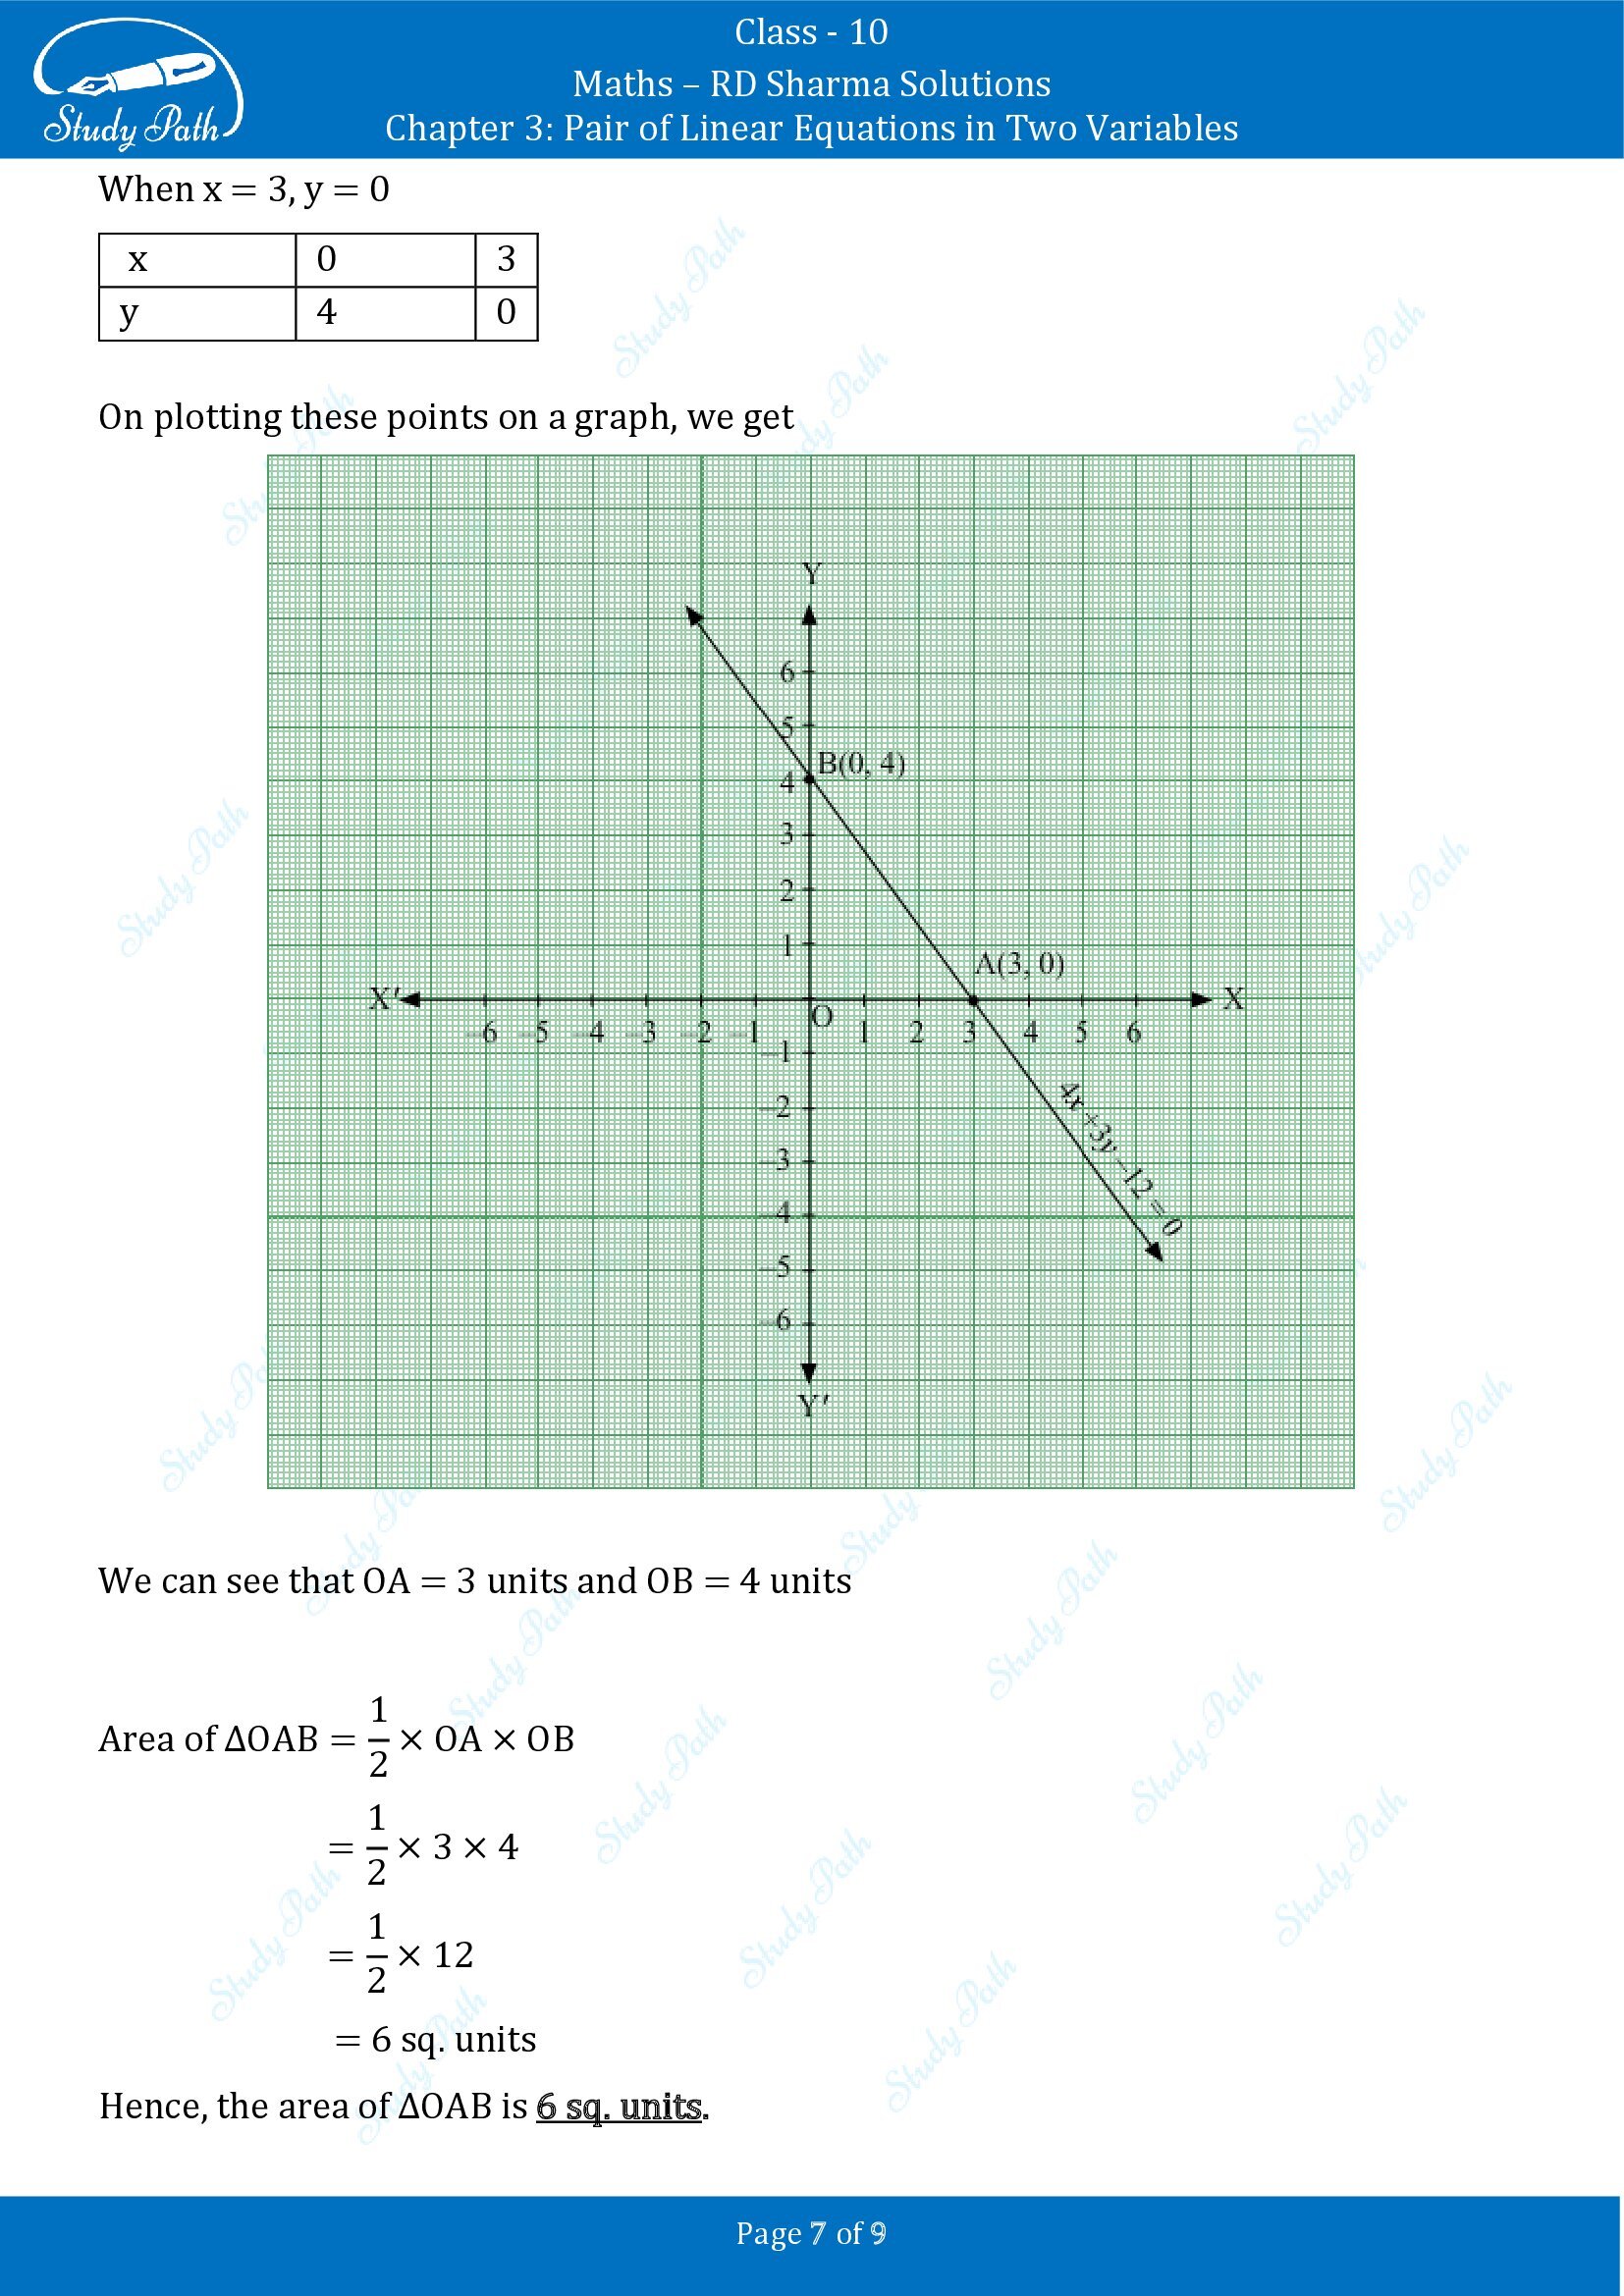 RD Sharma Solutions Class 10 Chapter 3 Pair of Linear Equations in Two Variables Exercise Fill in the Blank Type Questions FBQs 00007